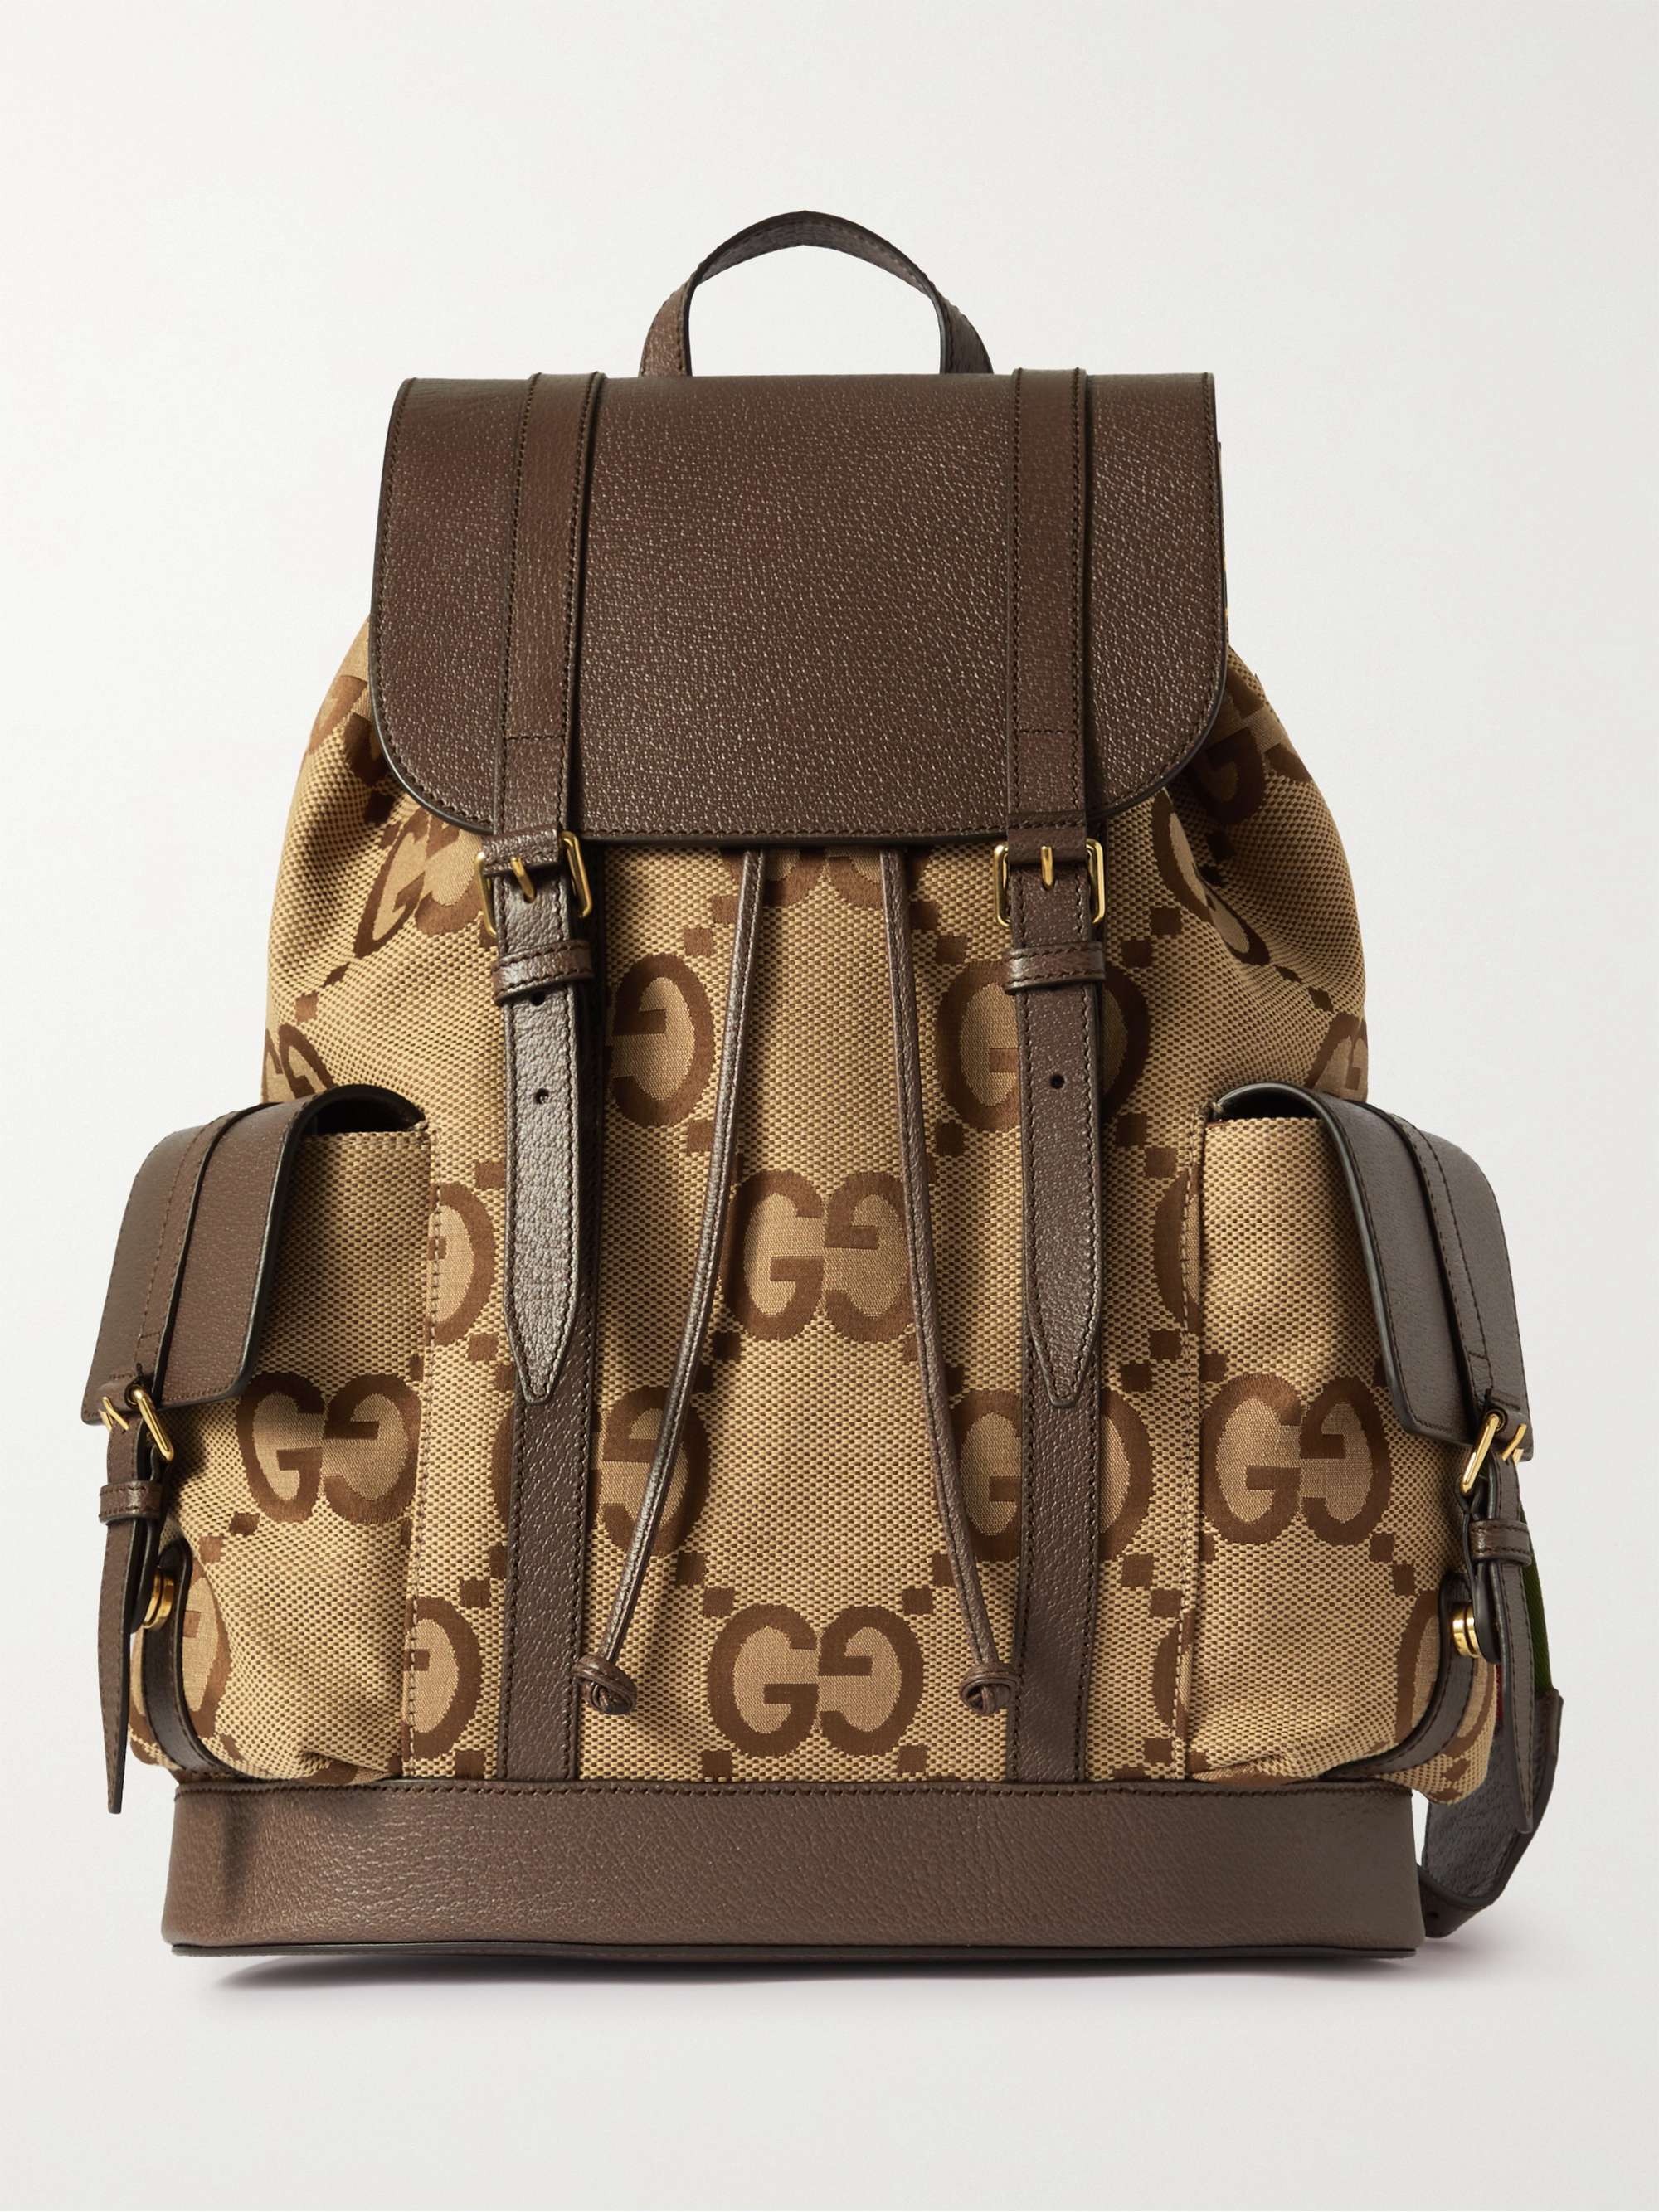 Brown GG Supreme leather-trimmed canvas backpack